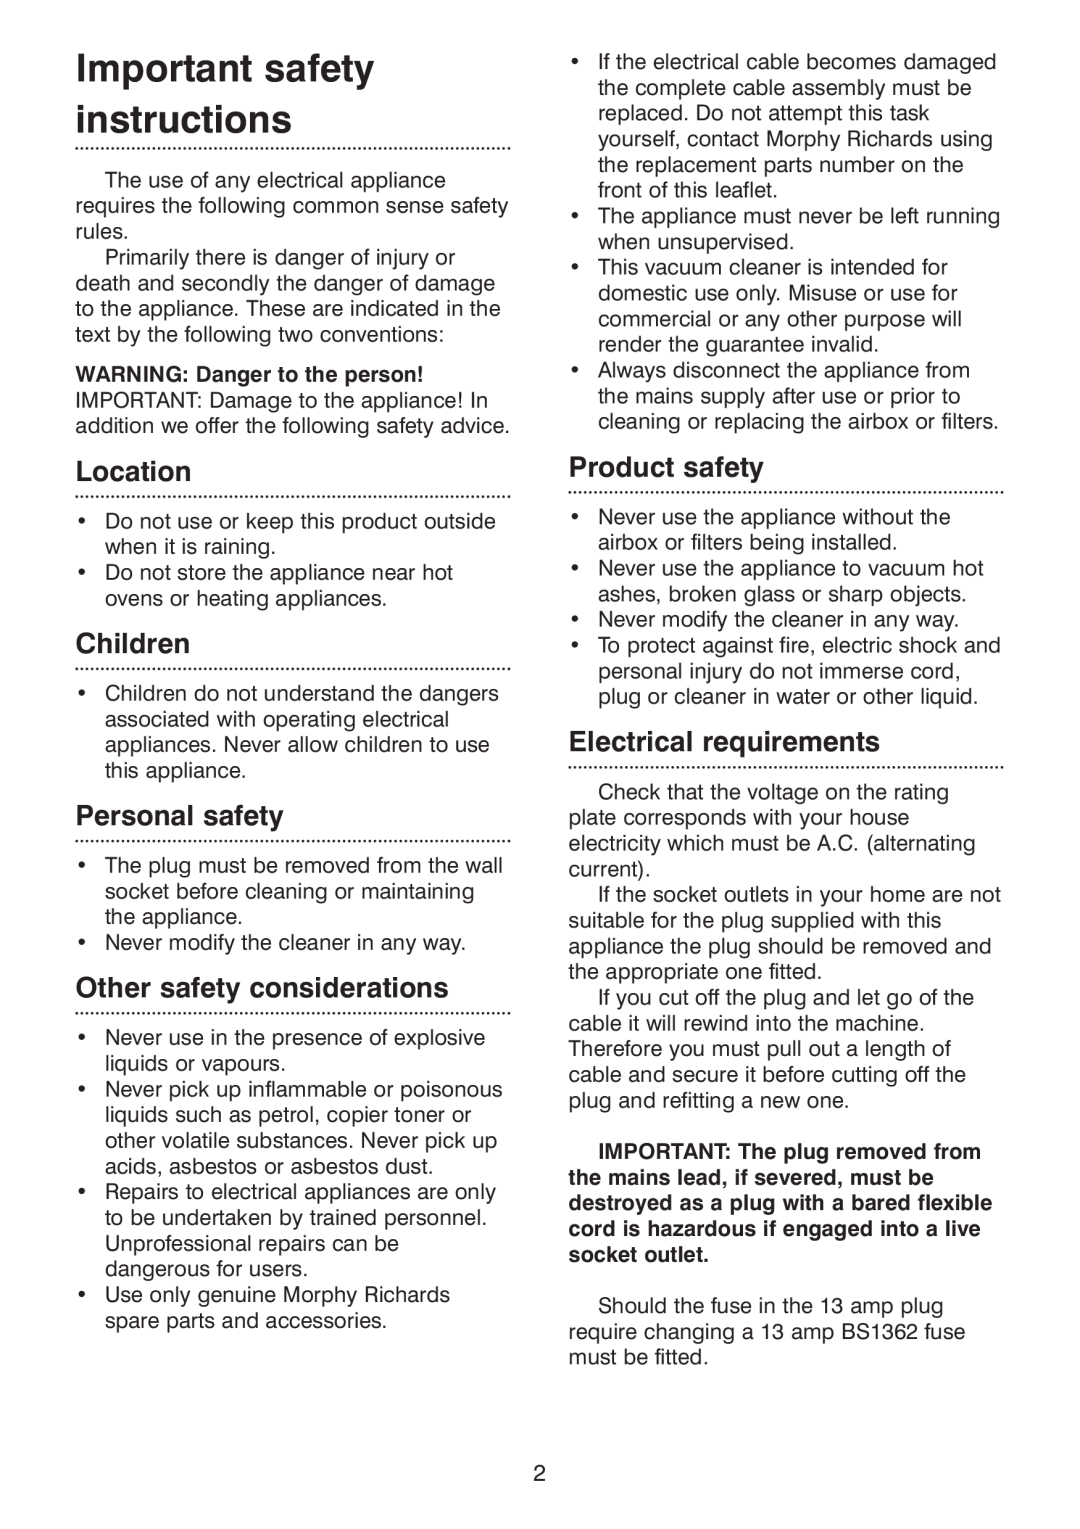 Morphy Richards Vacuum Cleaner manual Important safety instructions, WARNING Danger to the person, Location, Children 